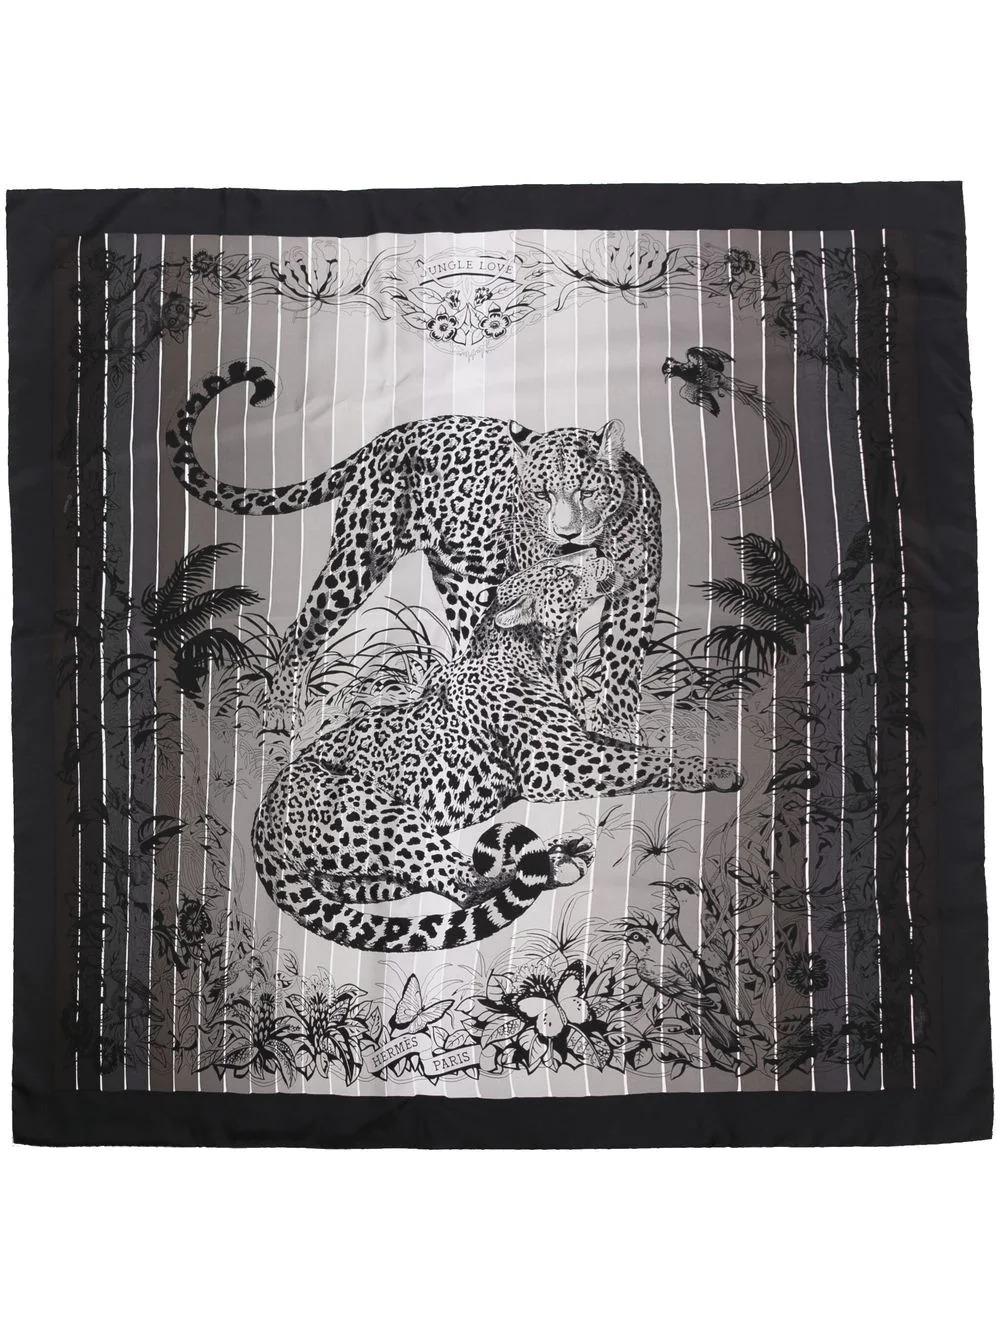 Designed by Robert Dallet, depicting one of its most famous drawings, Jungle Love has been reinvented on a filter of a white and black striped background. This pre-owned scarf shows a tender scene between two leopards approaching and observing each